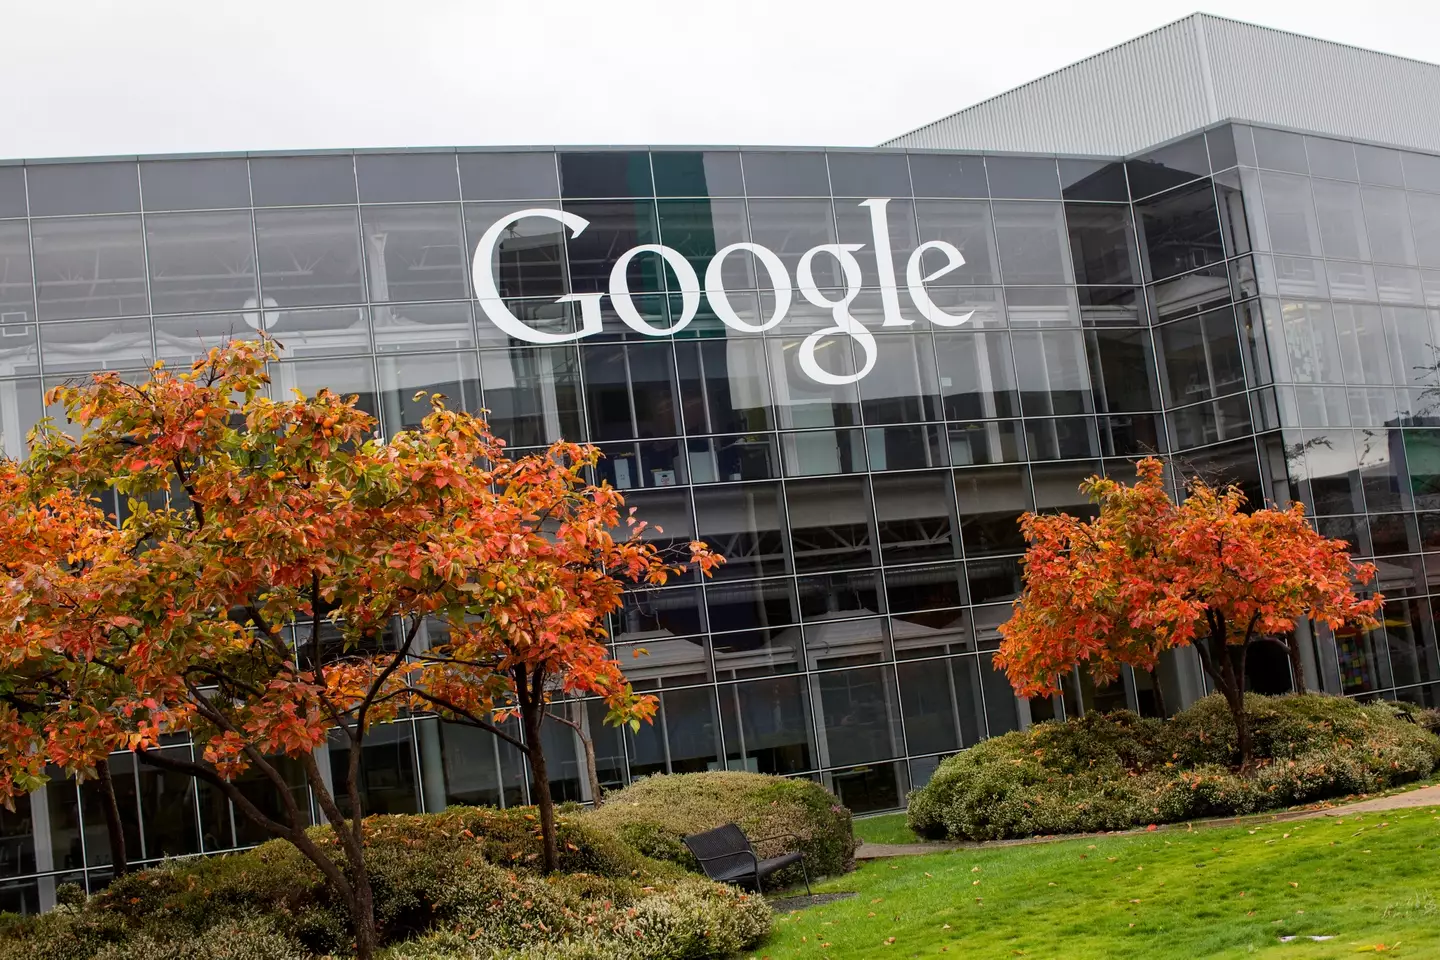 According to state officials, the breach likely made Google a lot of money.